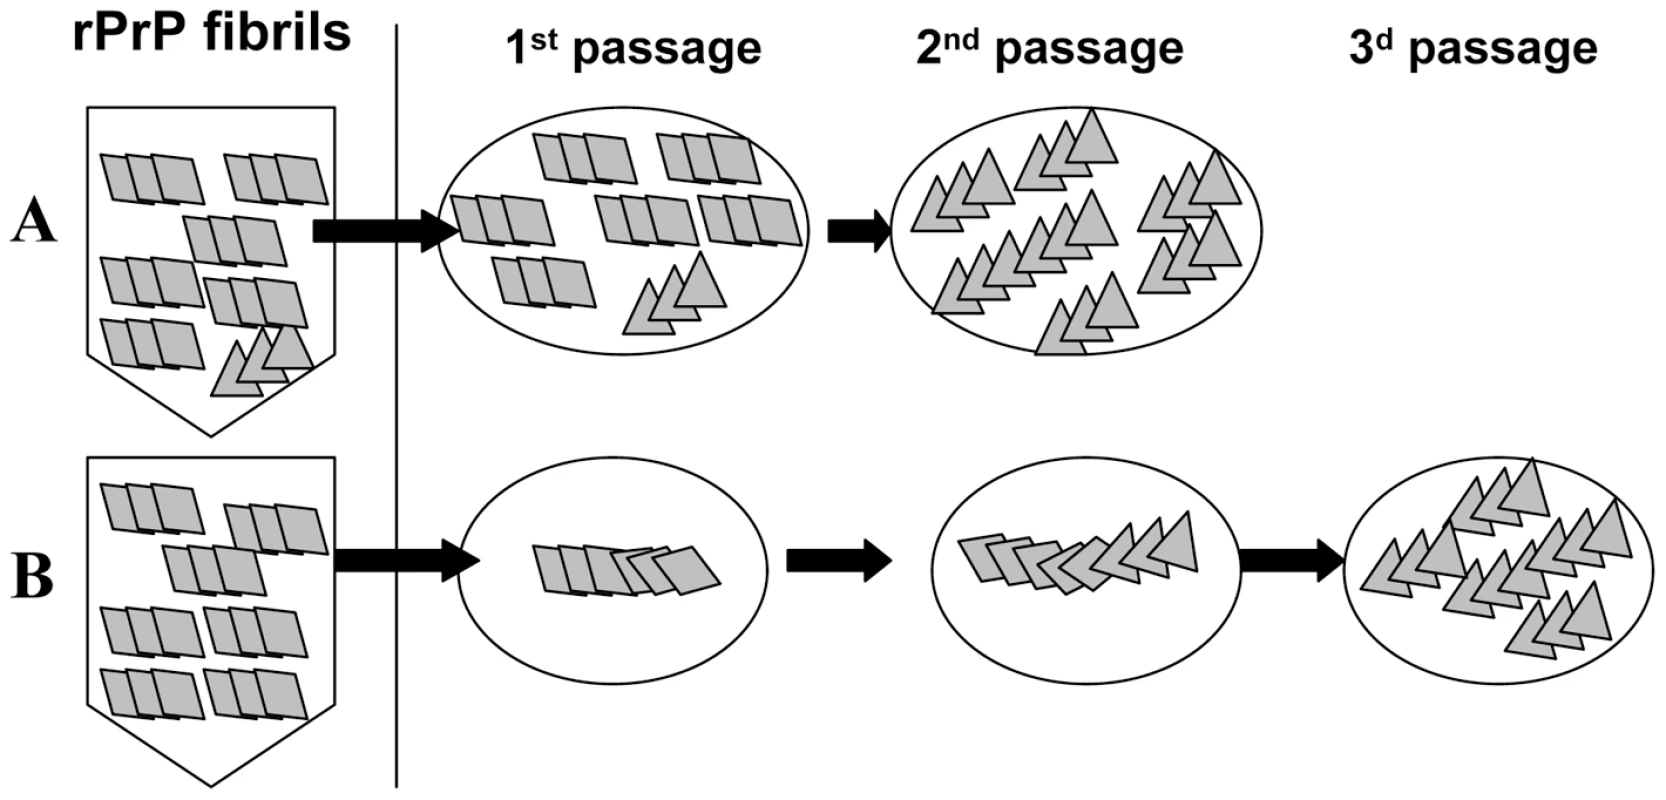 Schematic representation of two mechanisms responsible for generating transmissible prion diseases <i>de novo</i>.